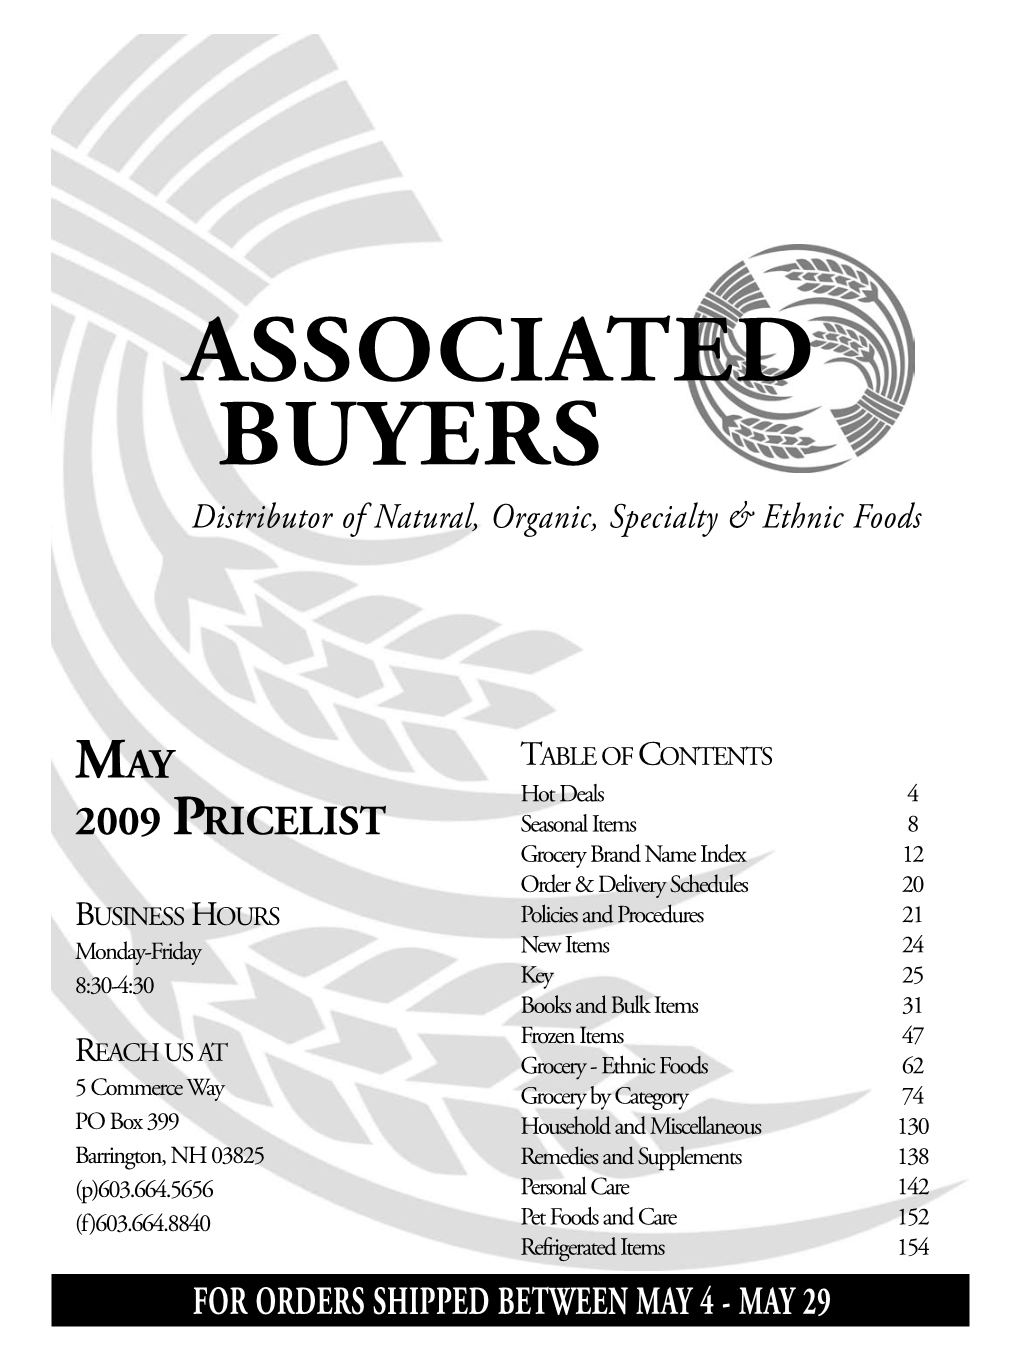 ASSOCIATED BUYERS Distributor of Natural, Organic, Specialty & Ethnic Foods